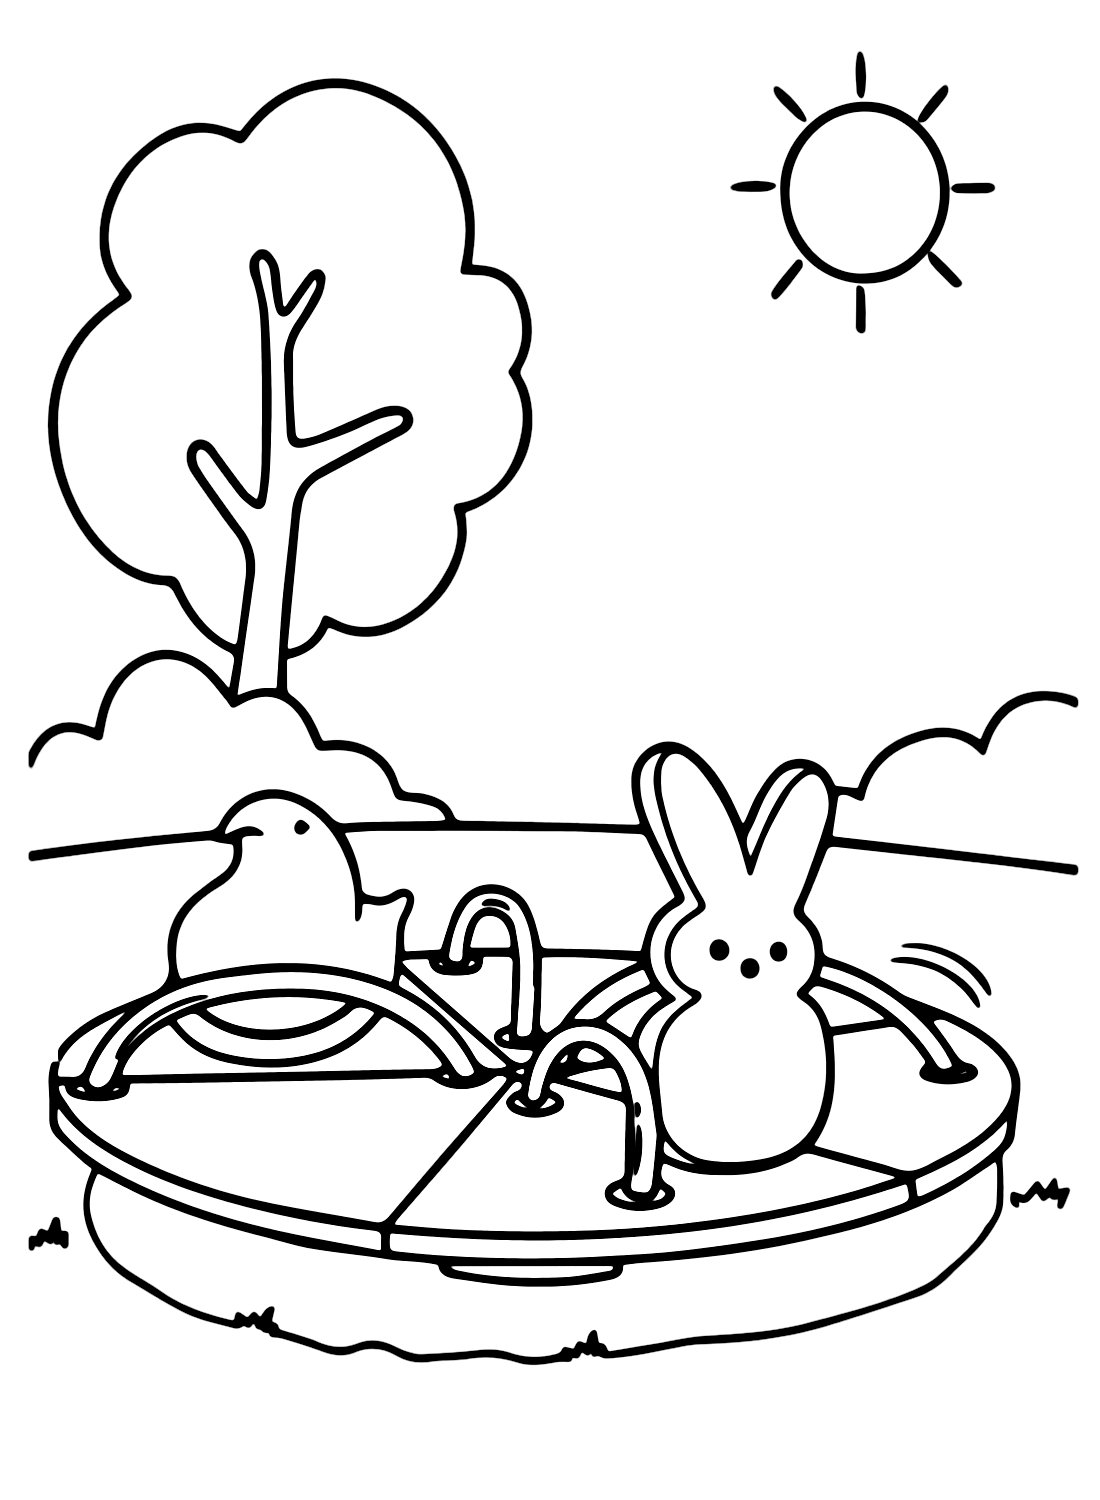 Chick and Bunny Marshmallow Peeps Coloring Page